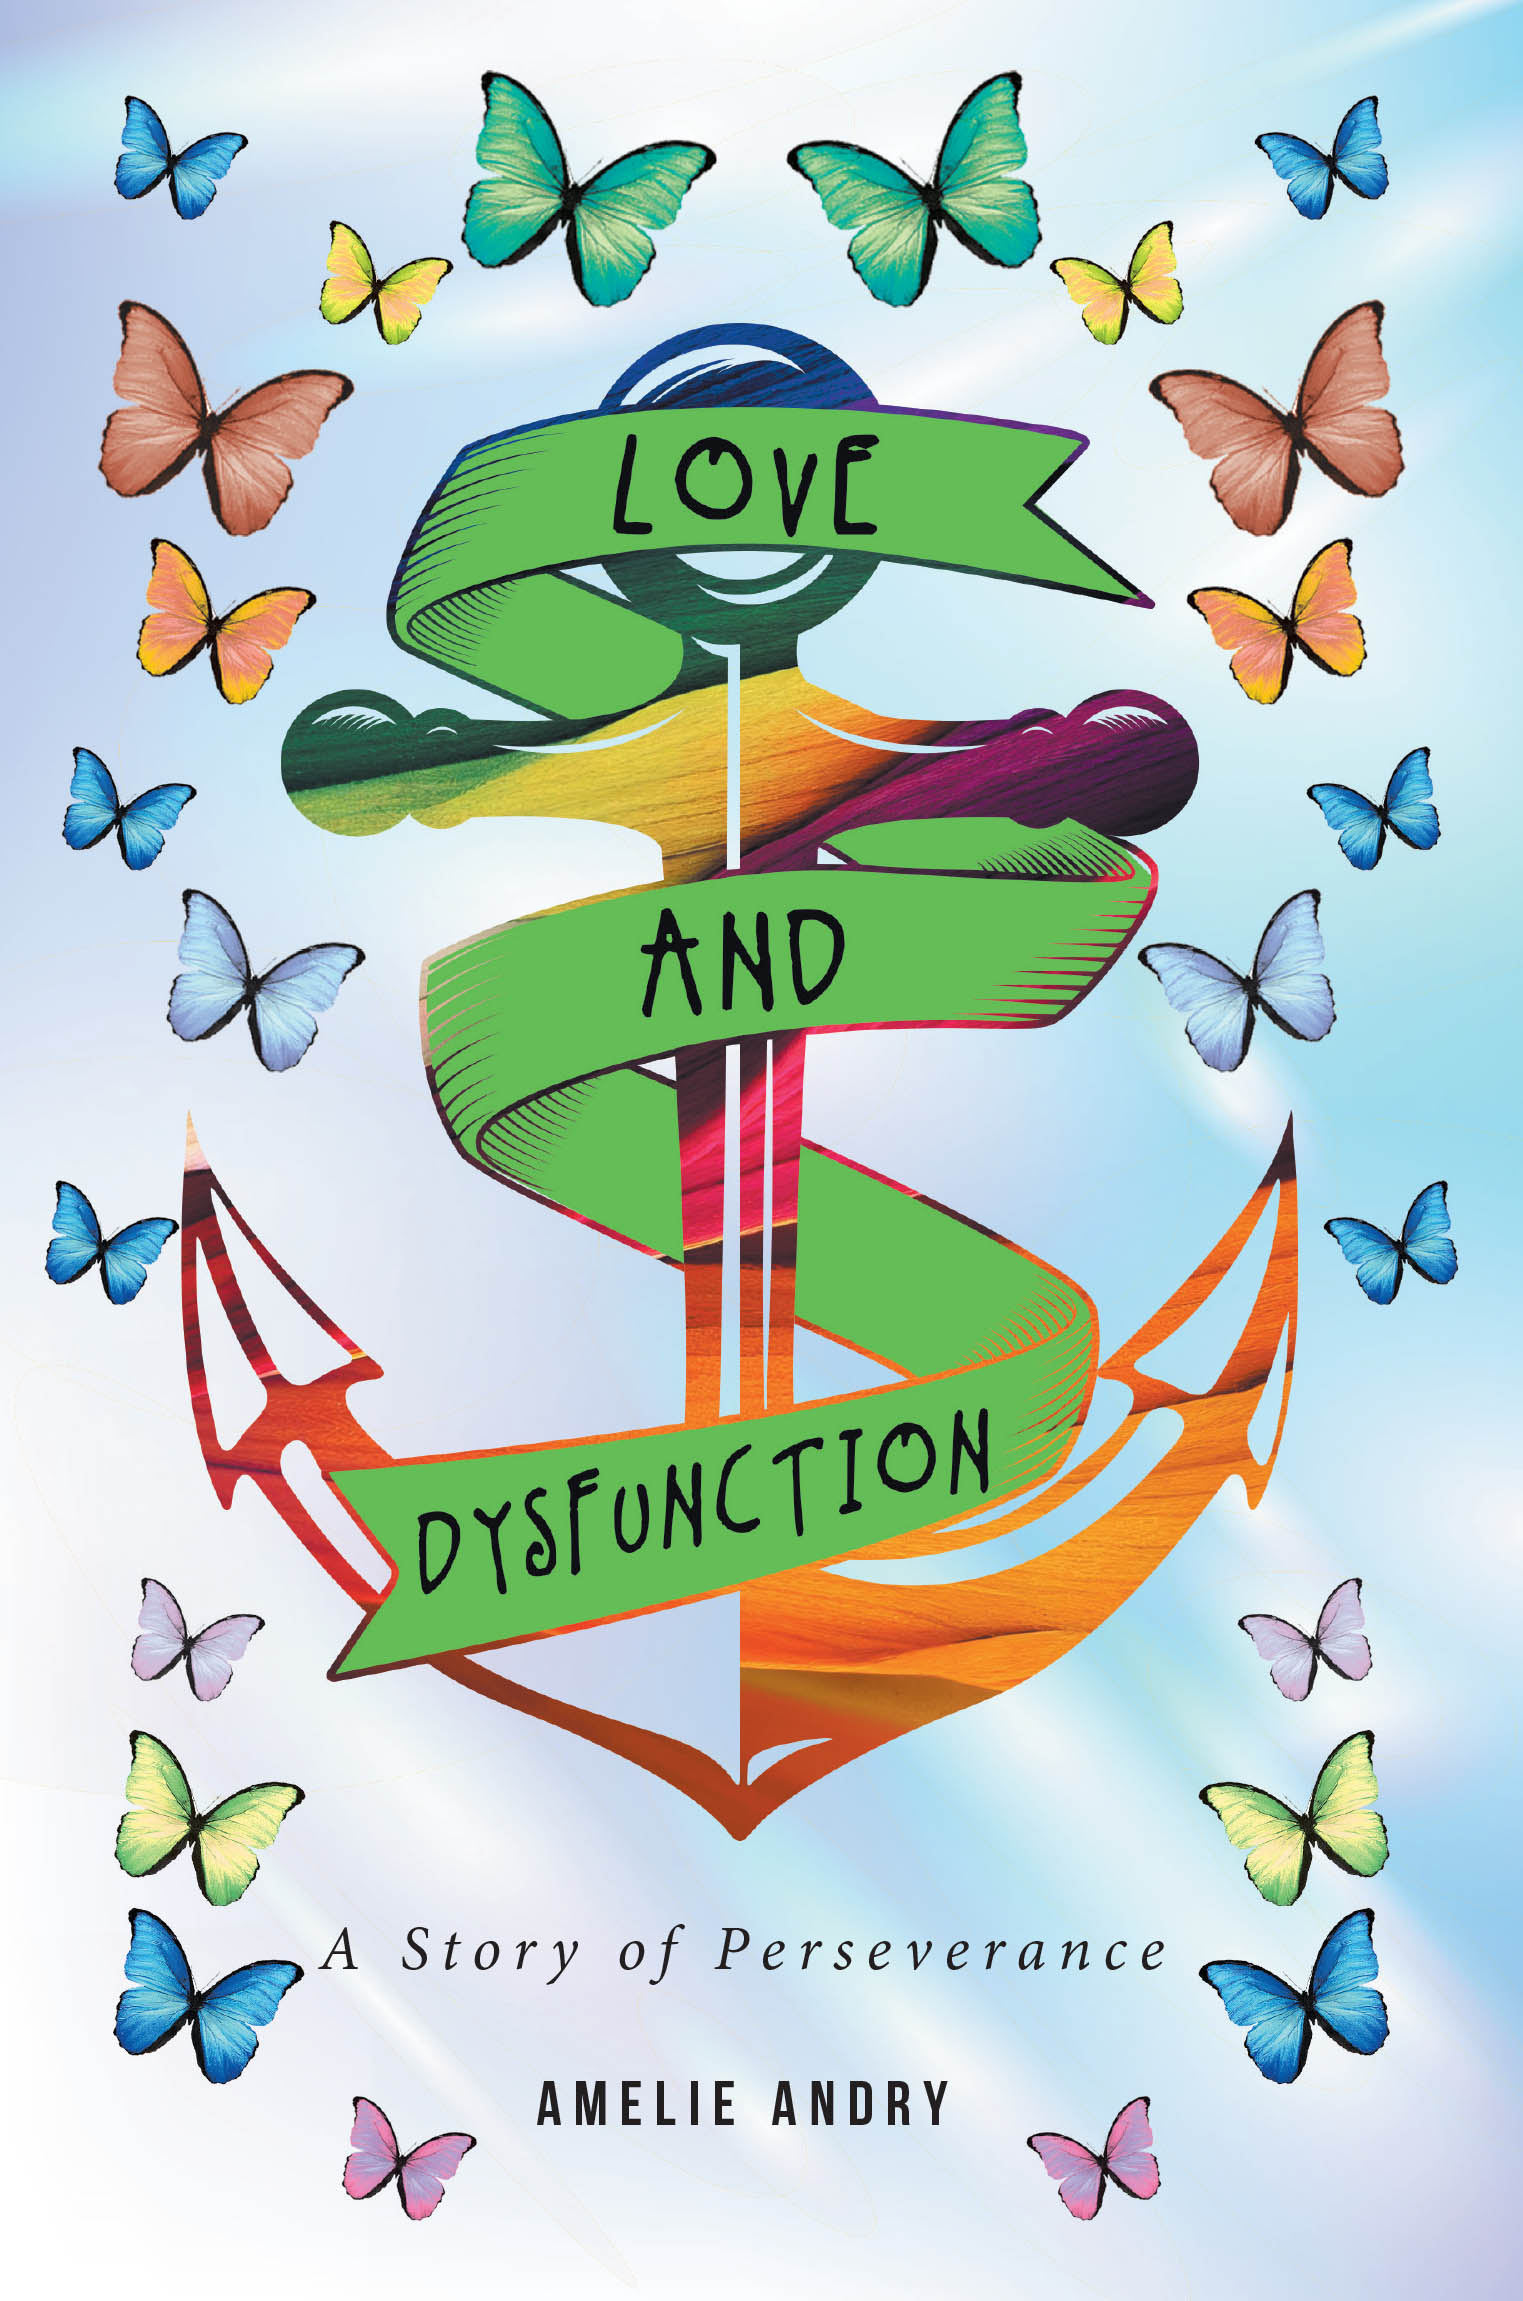 Amelie Andry’s New Book, "Love and Dysfunction: A Story of Perseverance," Recounts the Author’s Journey Through Hardships and Triumphs with Unwavering Courage and Humor